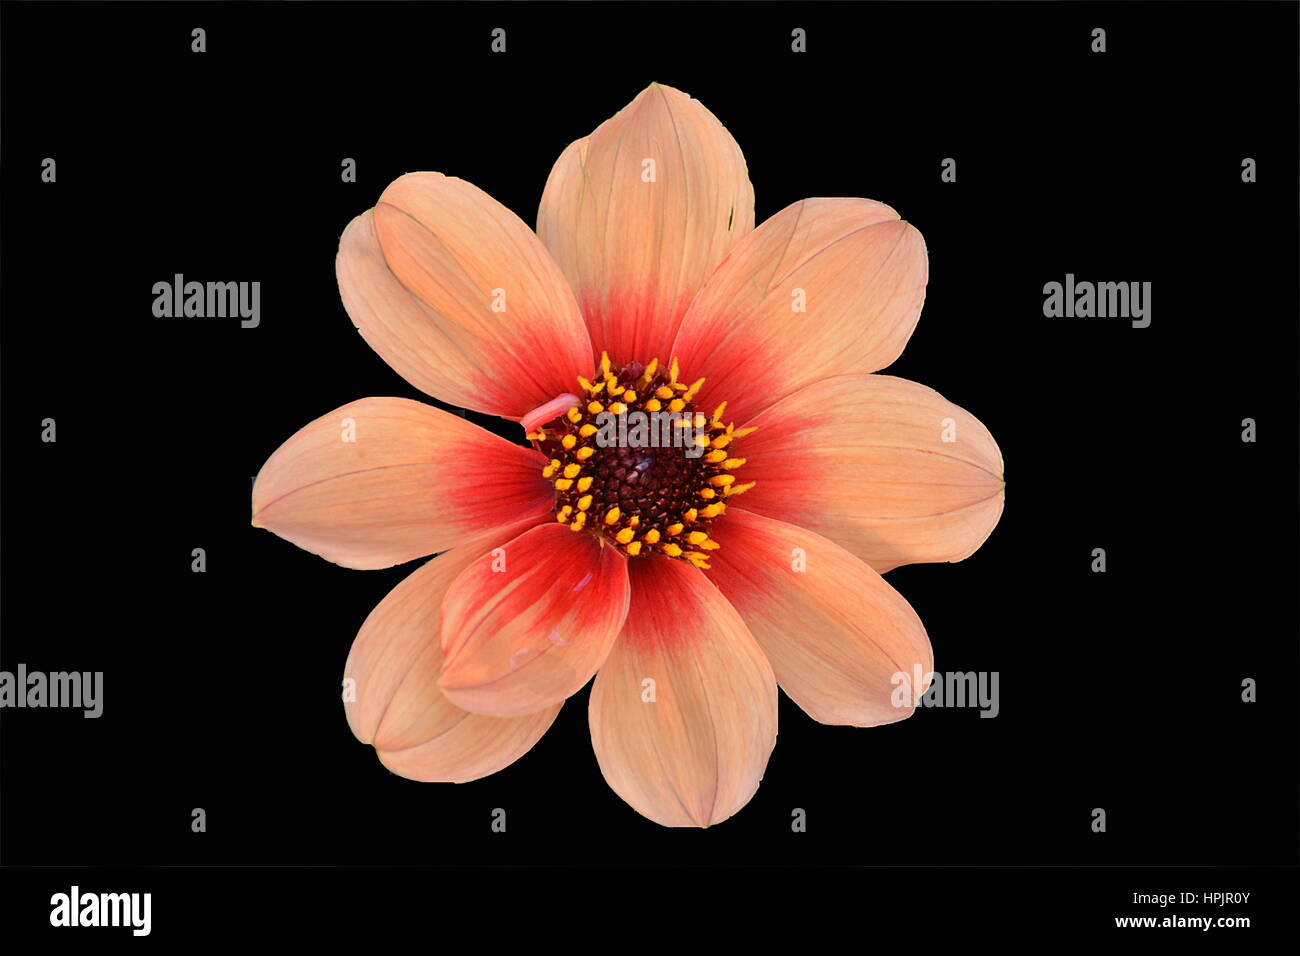 Flower and petals. Stock Photo